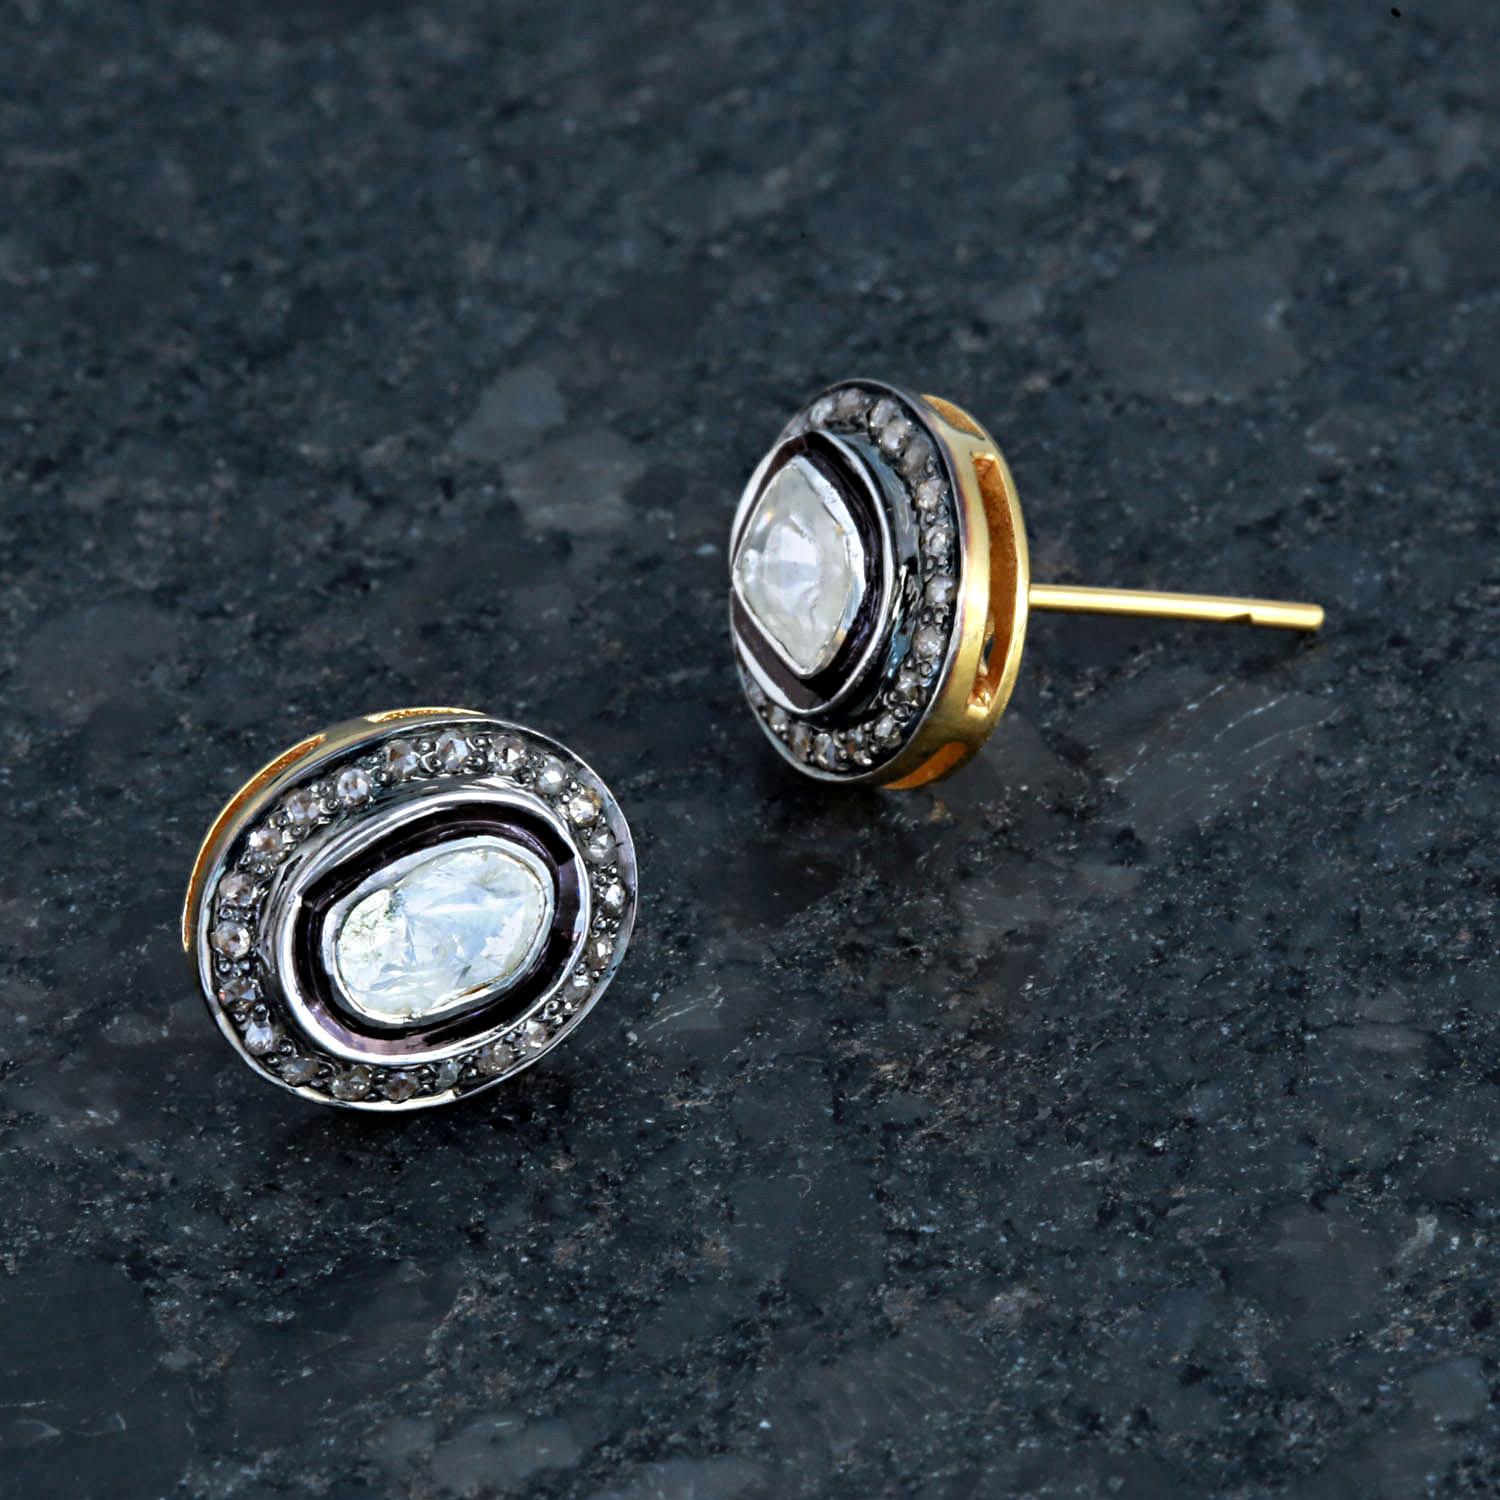 Diamond Studded Earring with 0.88 Carat Diamonds. Total Gross weight of the Stud earring is 4.340 Grams with gold weight worth 0.290 grams and 925 sterling silver worth weight 3.874 grams.

Diamonds are well-known for their ability to improve one's